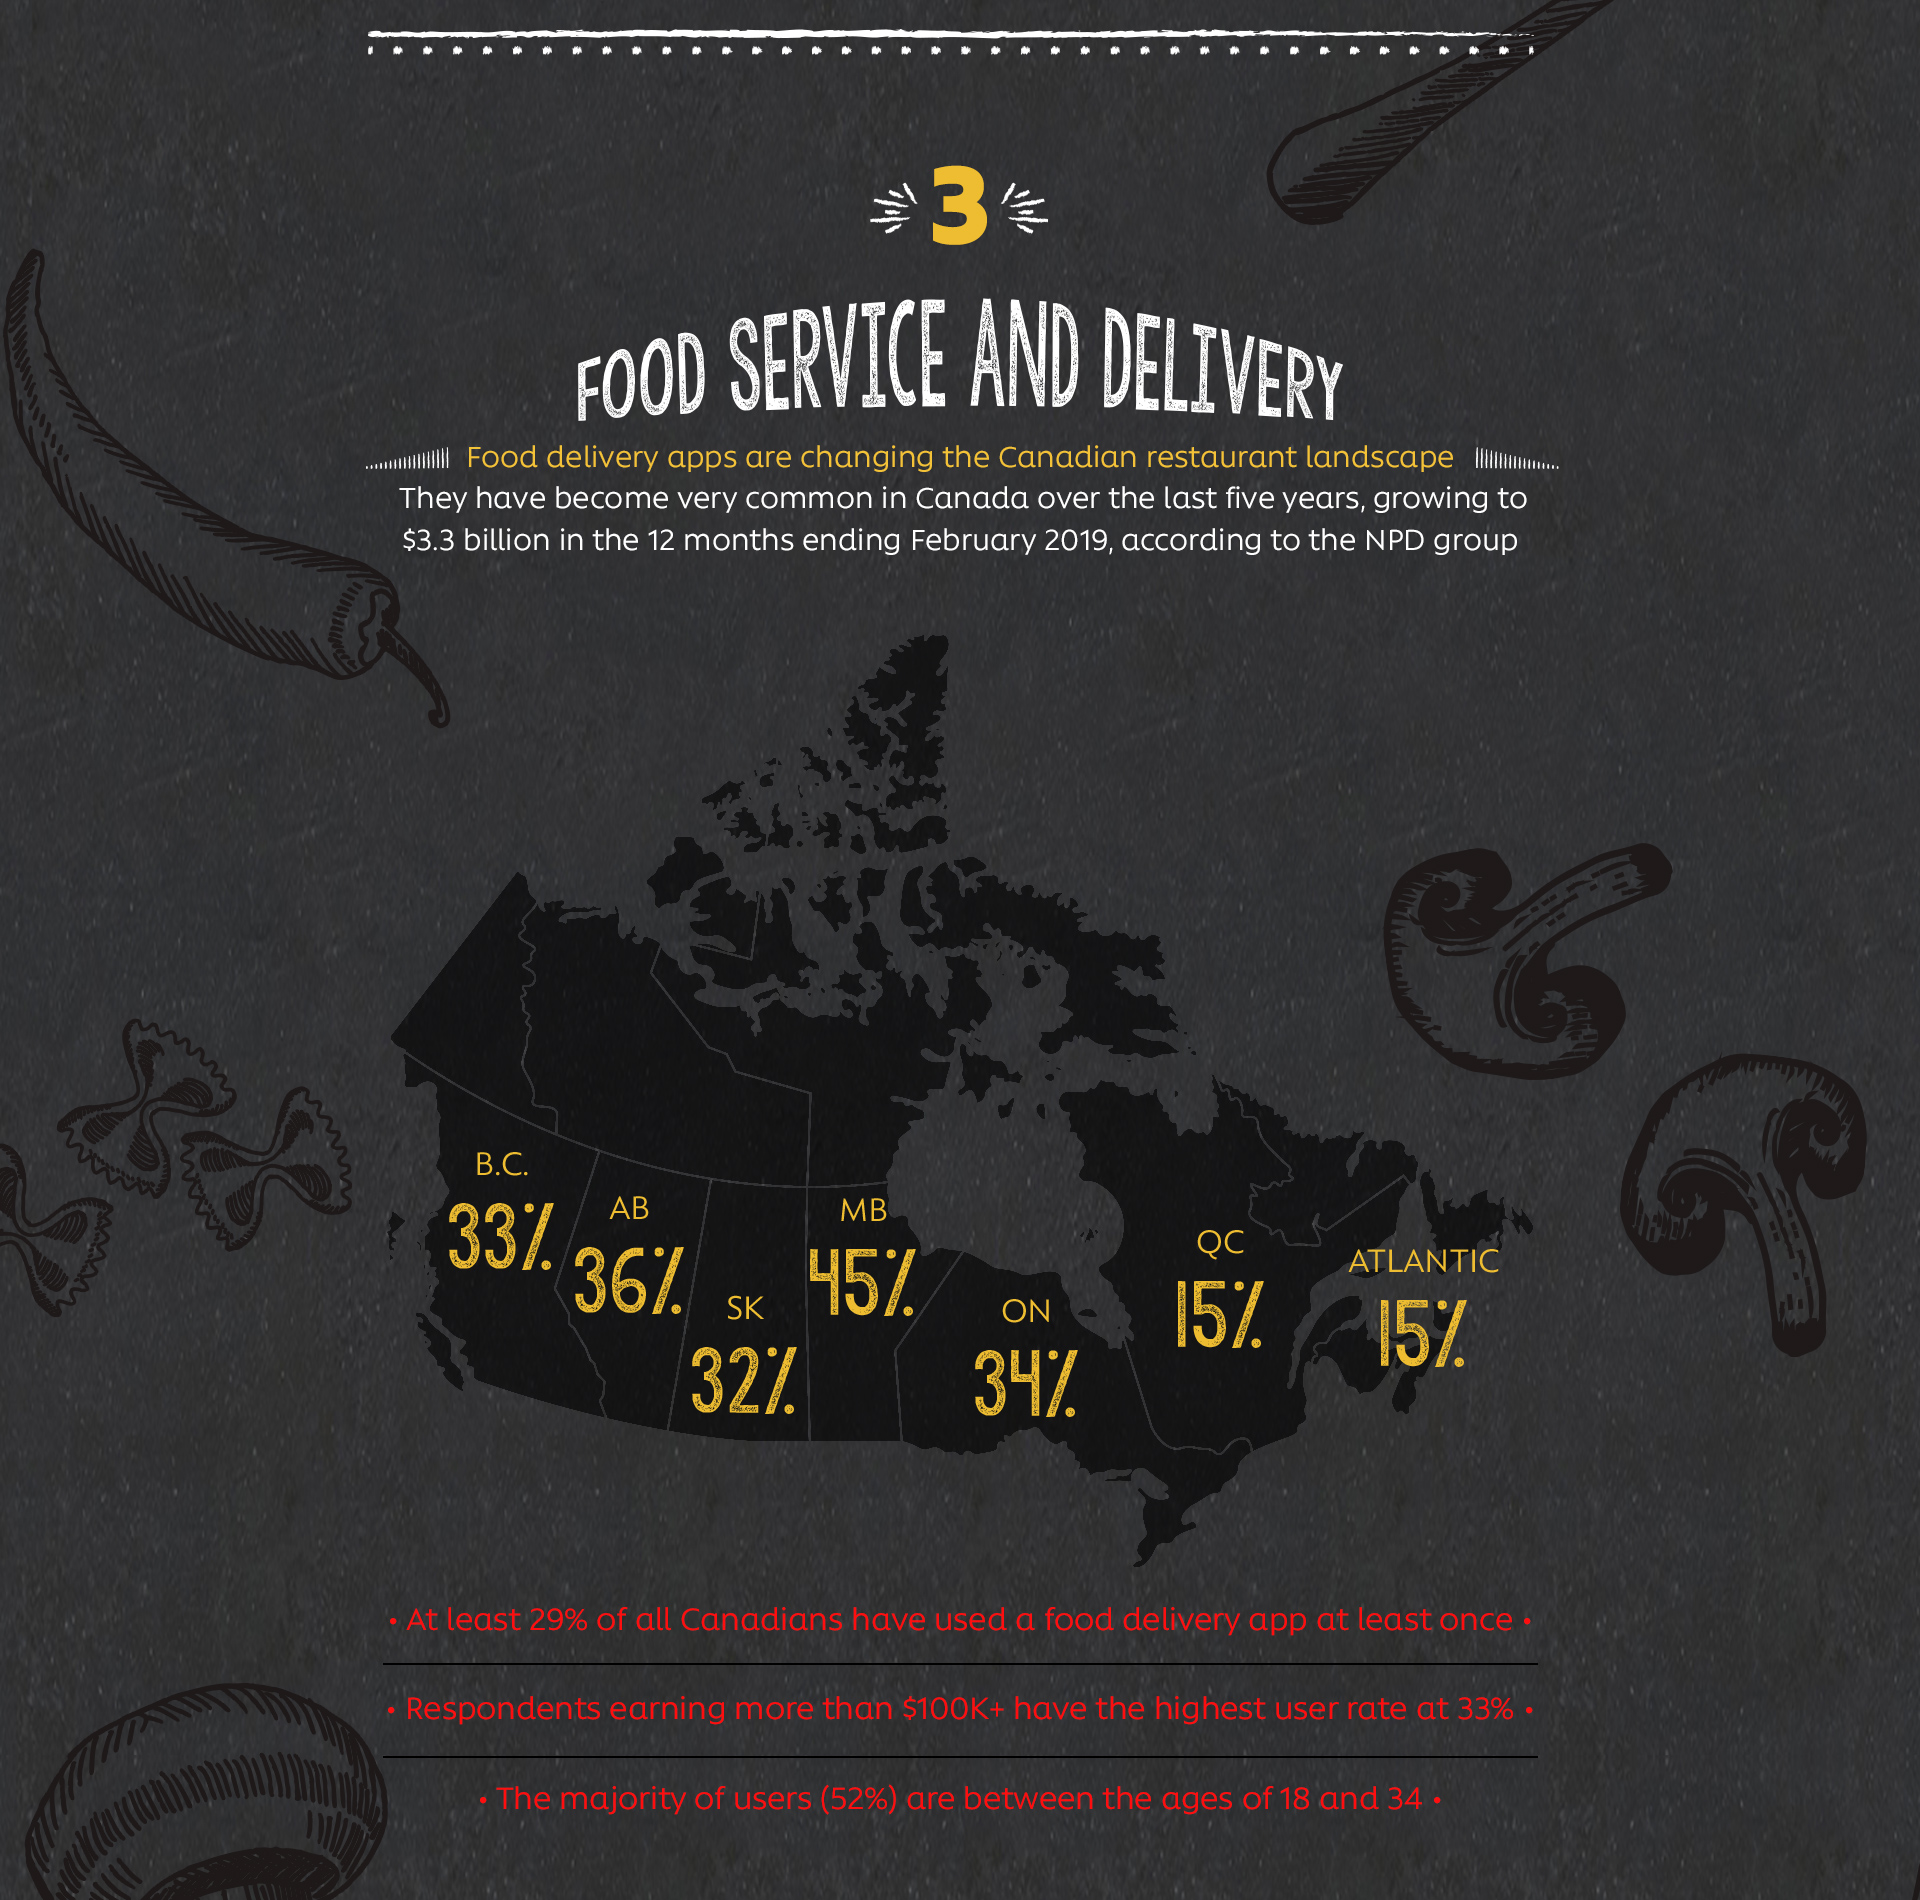 3. Food Service and Delivery, Food delivery apps are changing the Canadian restaurant landscape.